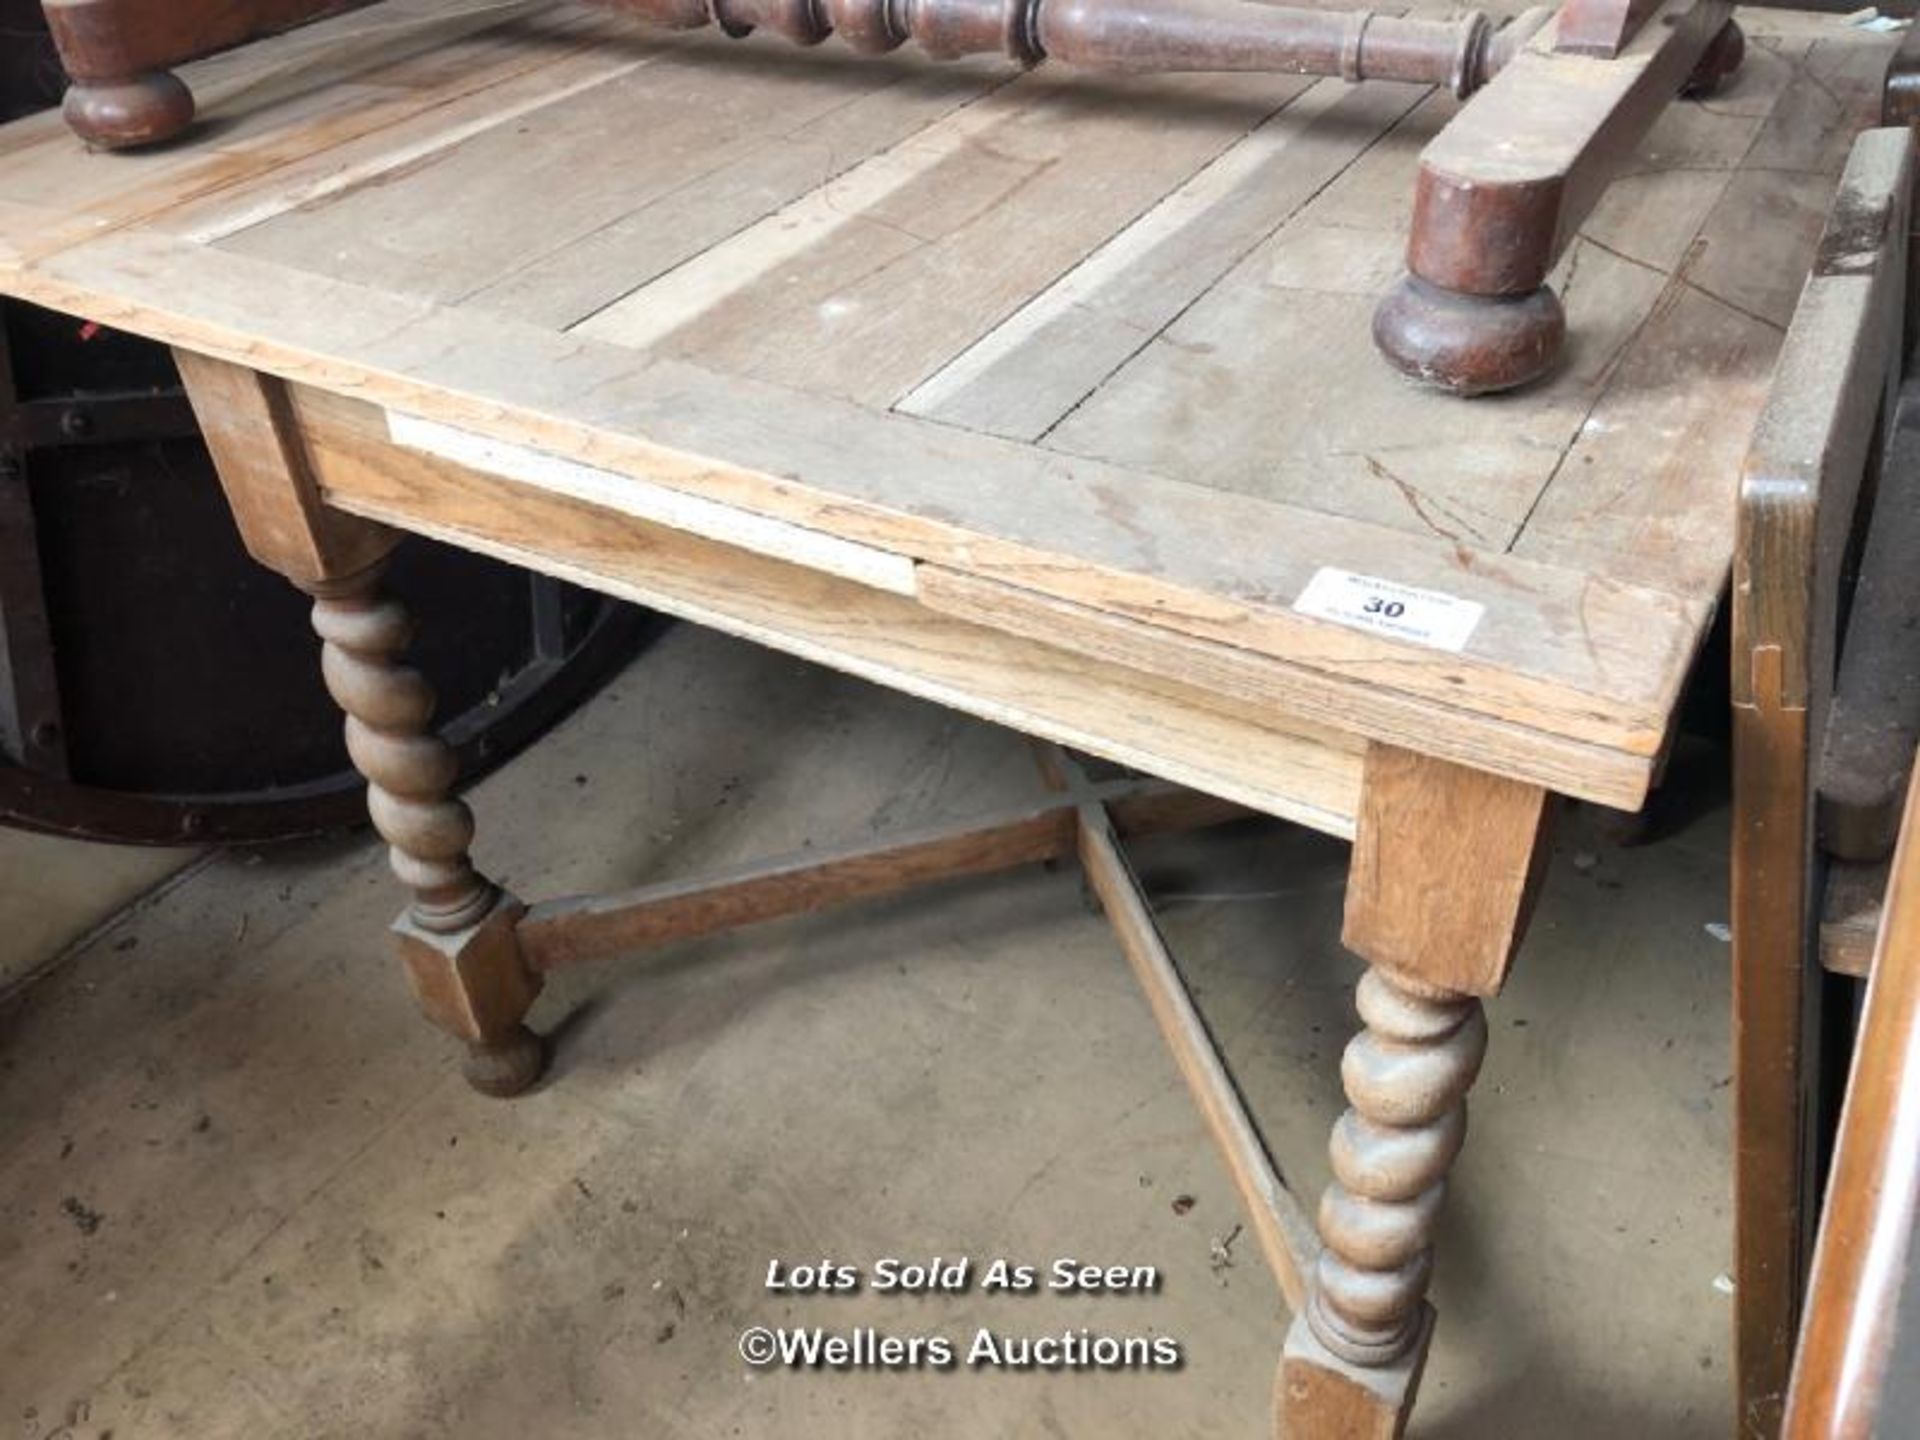 SQUARE DROP LEAF DINING TABLE, 36 X 36 X 29.5 INCHES / LOCATED AT VICTORIA ANTIQUES, WADEBRIDGE,